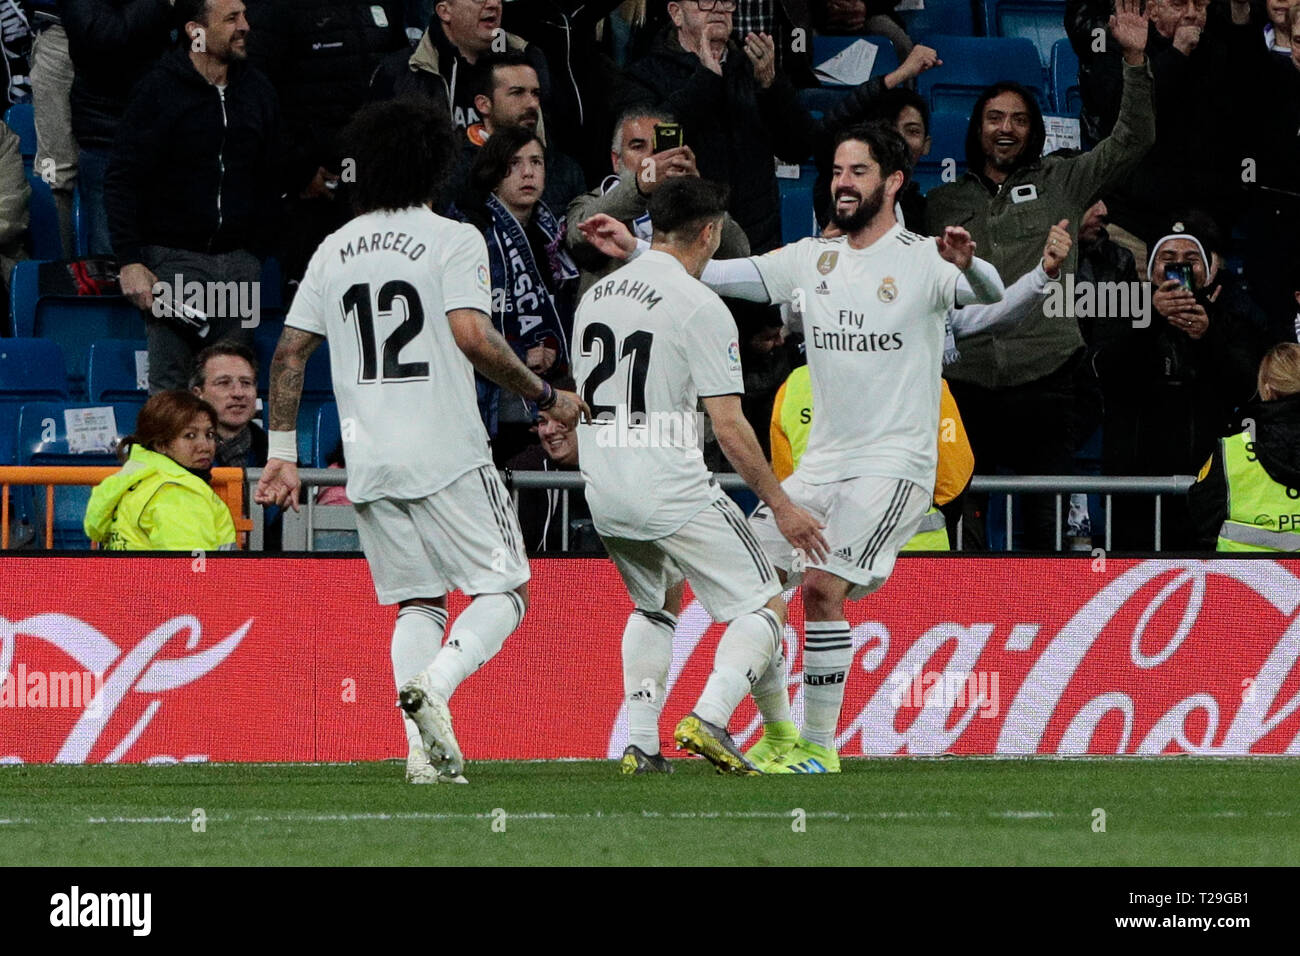 Real Madrid's (L-R) Marcelo Vieira, Brahim Diaz and Francisco Alarcon 'Isco' celebrate goal during La Liga match between Real Madrid and SD Huesca at Santiago Bernabeu Stadium in Madrid, Spain. Final score: Real Madrid 3 - SD Huesca 2. Stock Photo